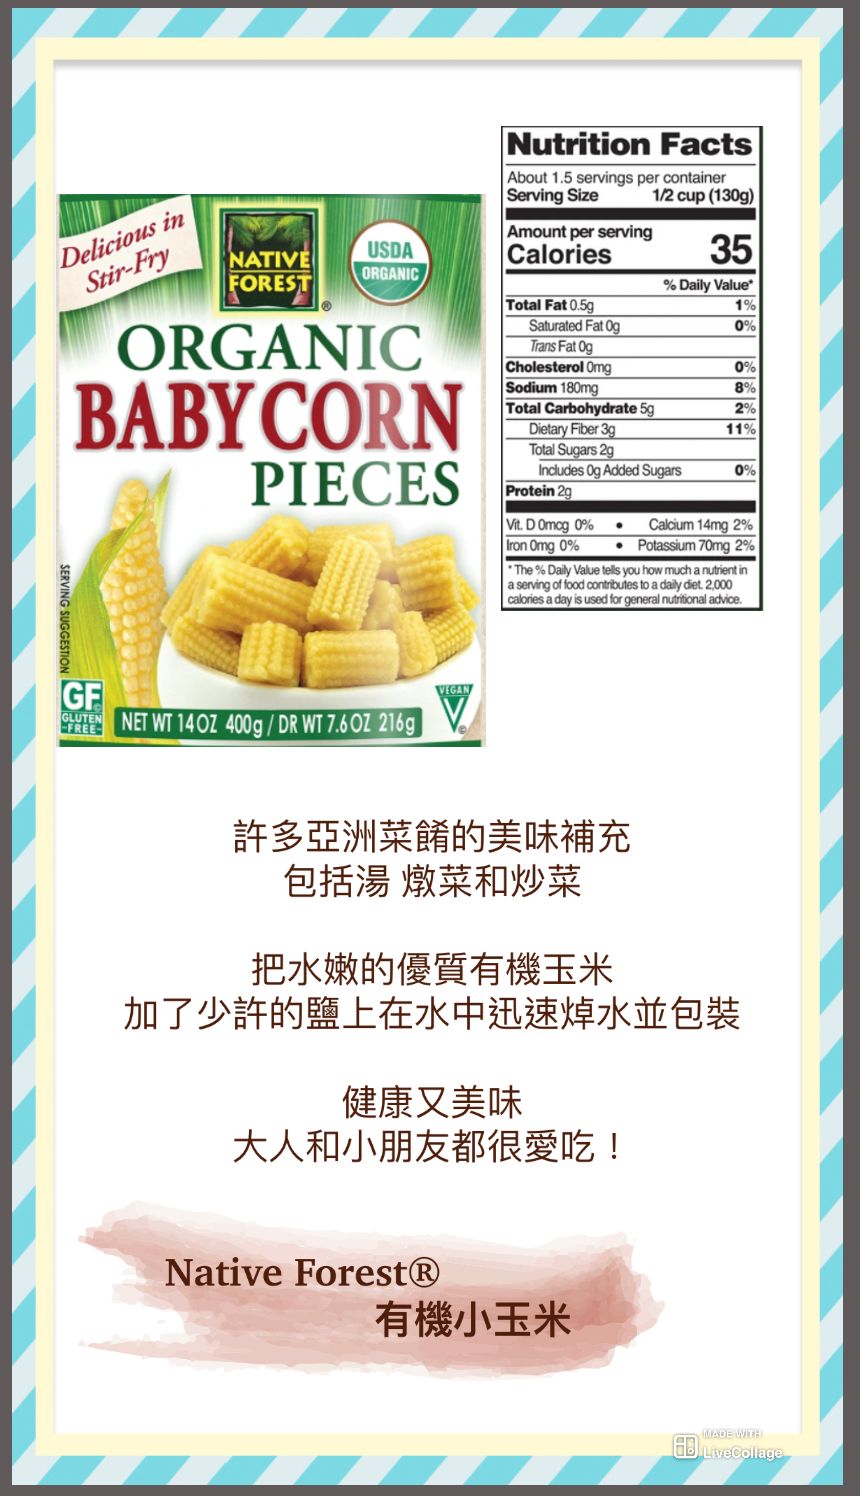 ✅ Native Forest Organic Baby Corn Pieces